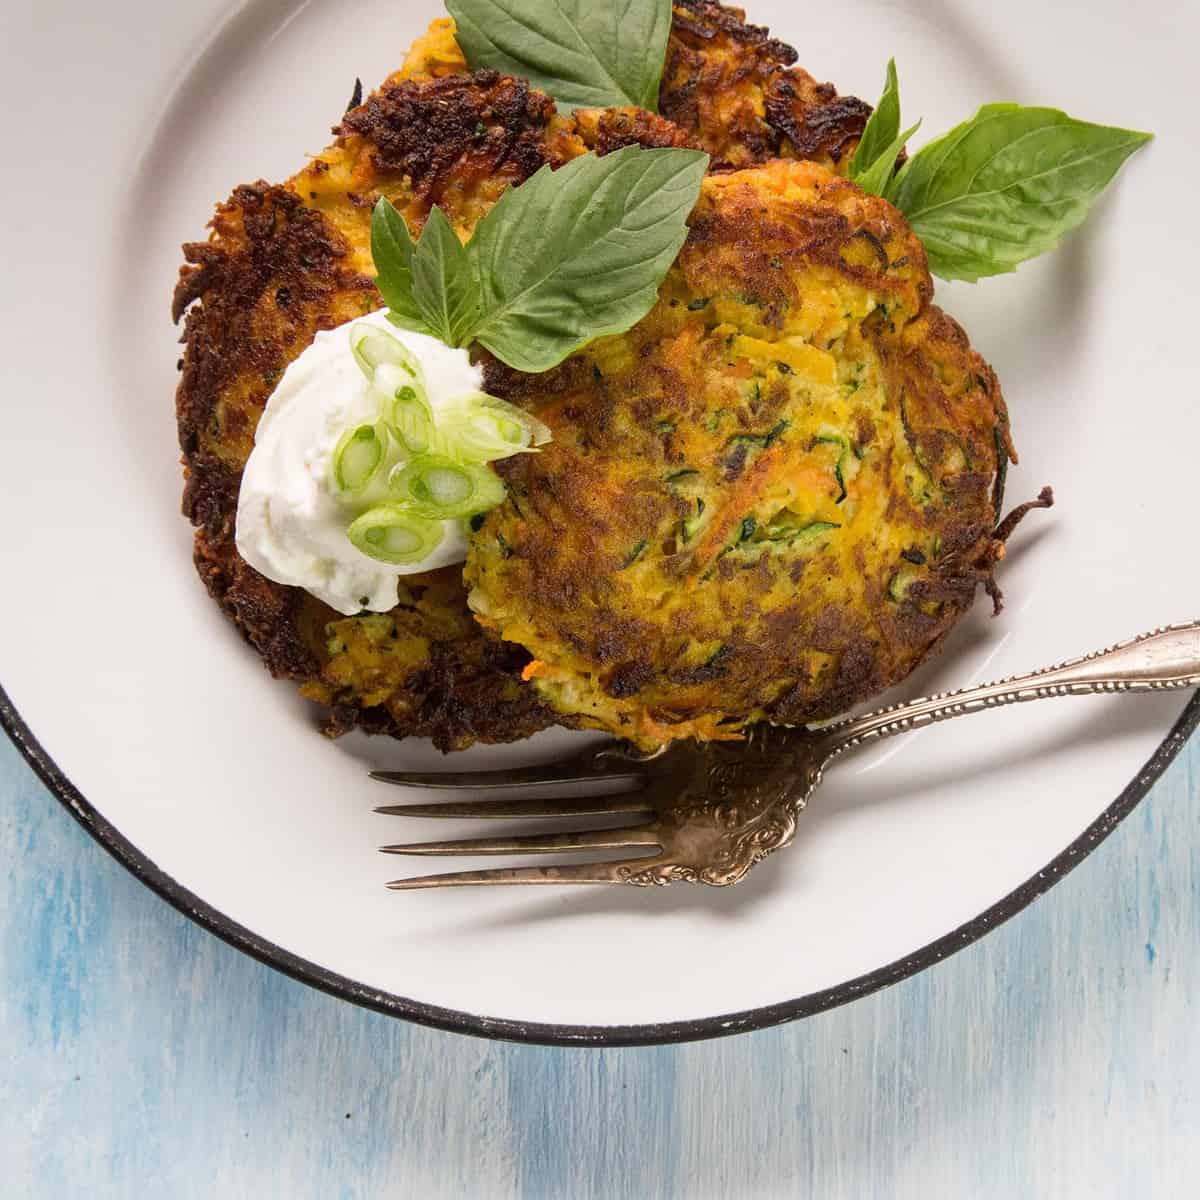  Fluffy and flavorful vegan paleo vegetable pancakes!